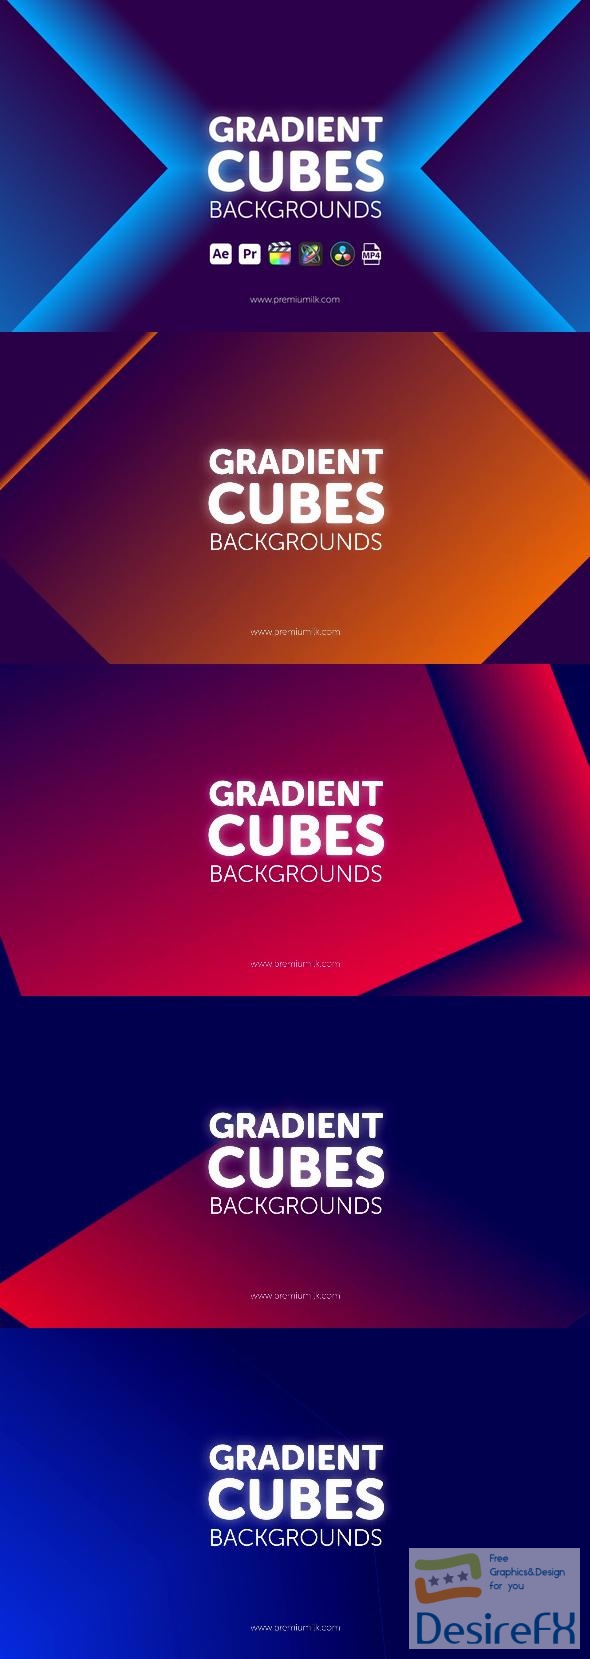 VideoHive Gradient Cubes Backgrounds 45237181